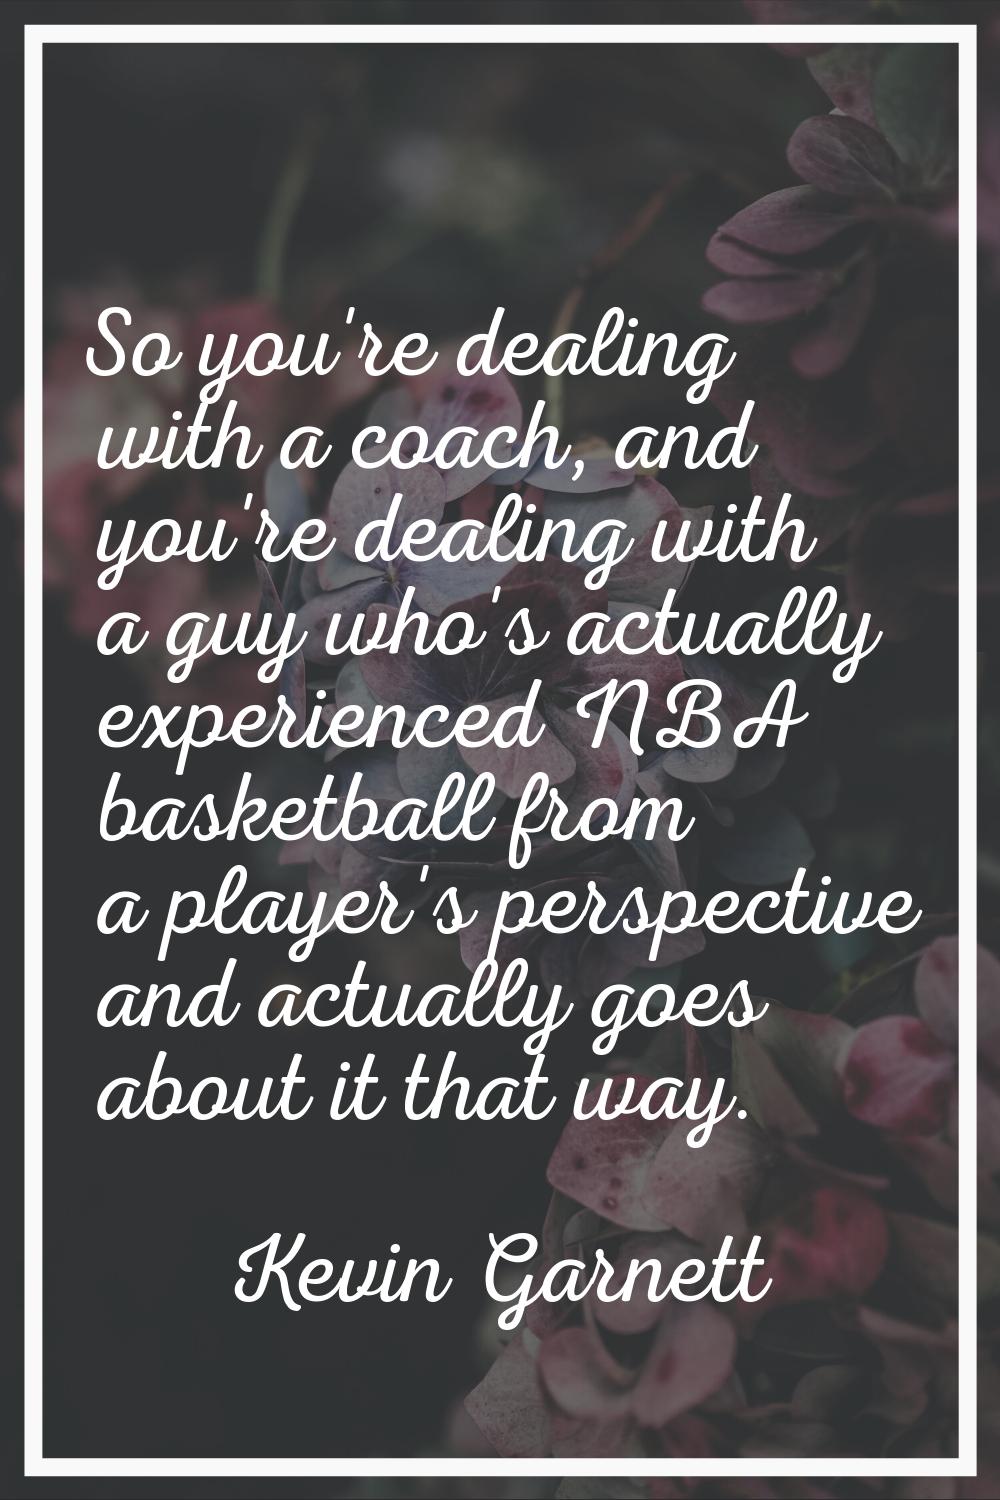 So you're dealing with a coach, and you're dealing with a guy who's actually experienced NBA basket